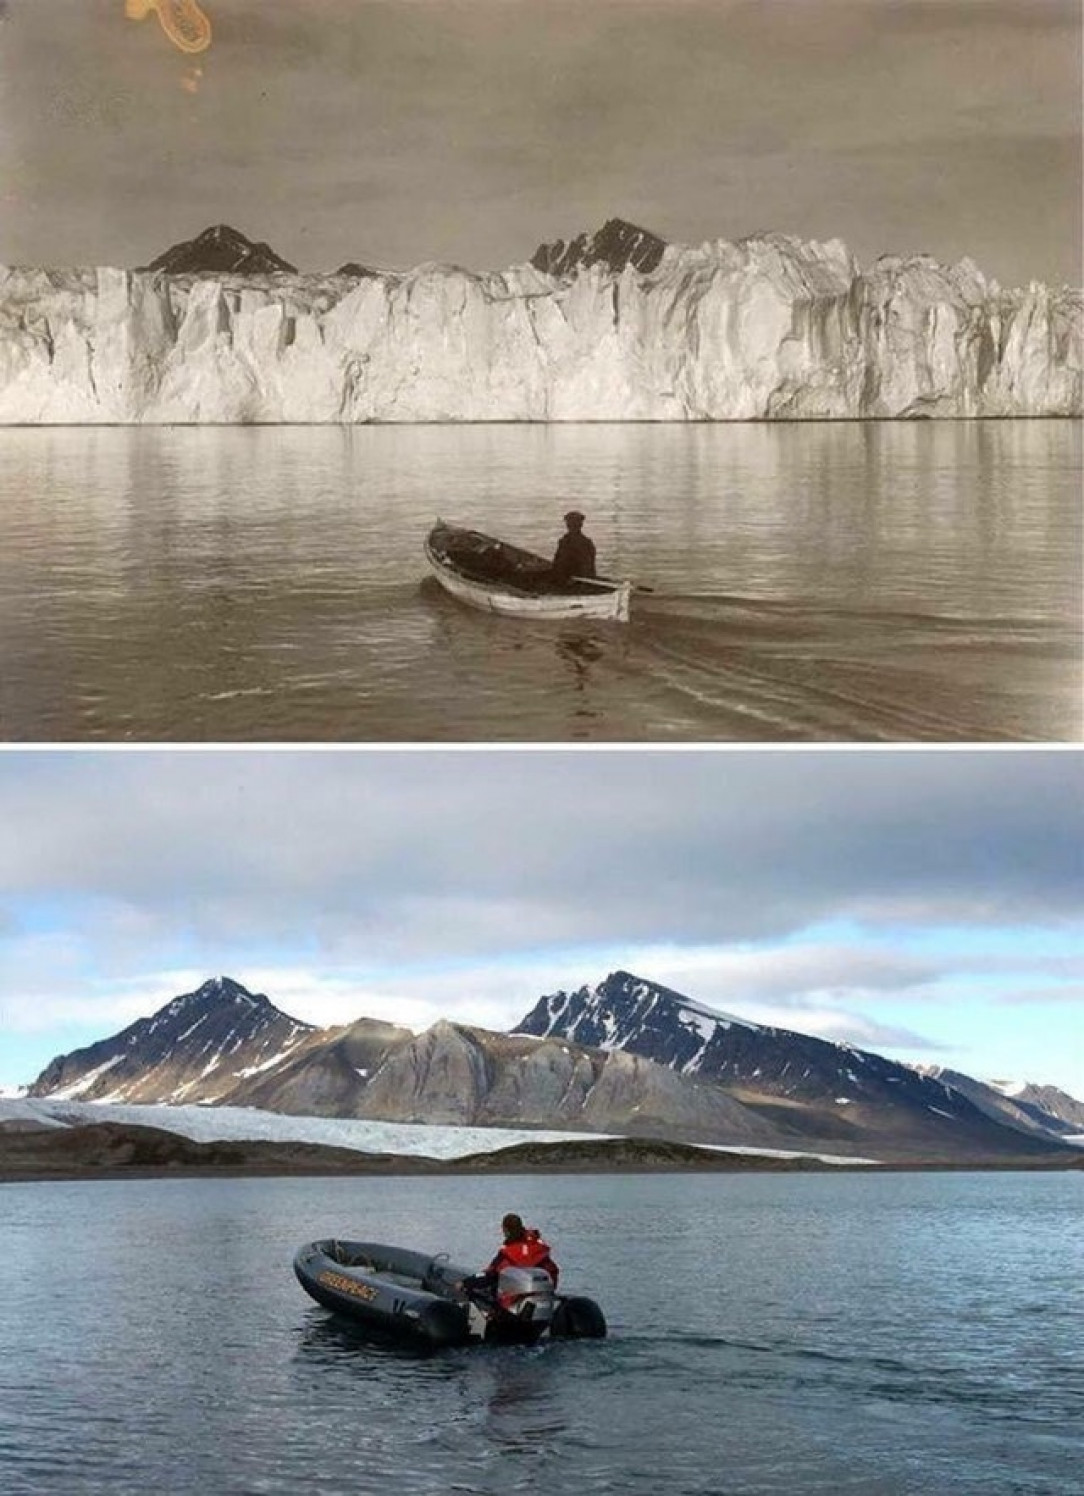 Photos are taken from the same location in the Arctic 100 years apart